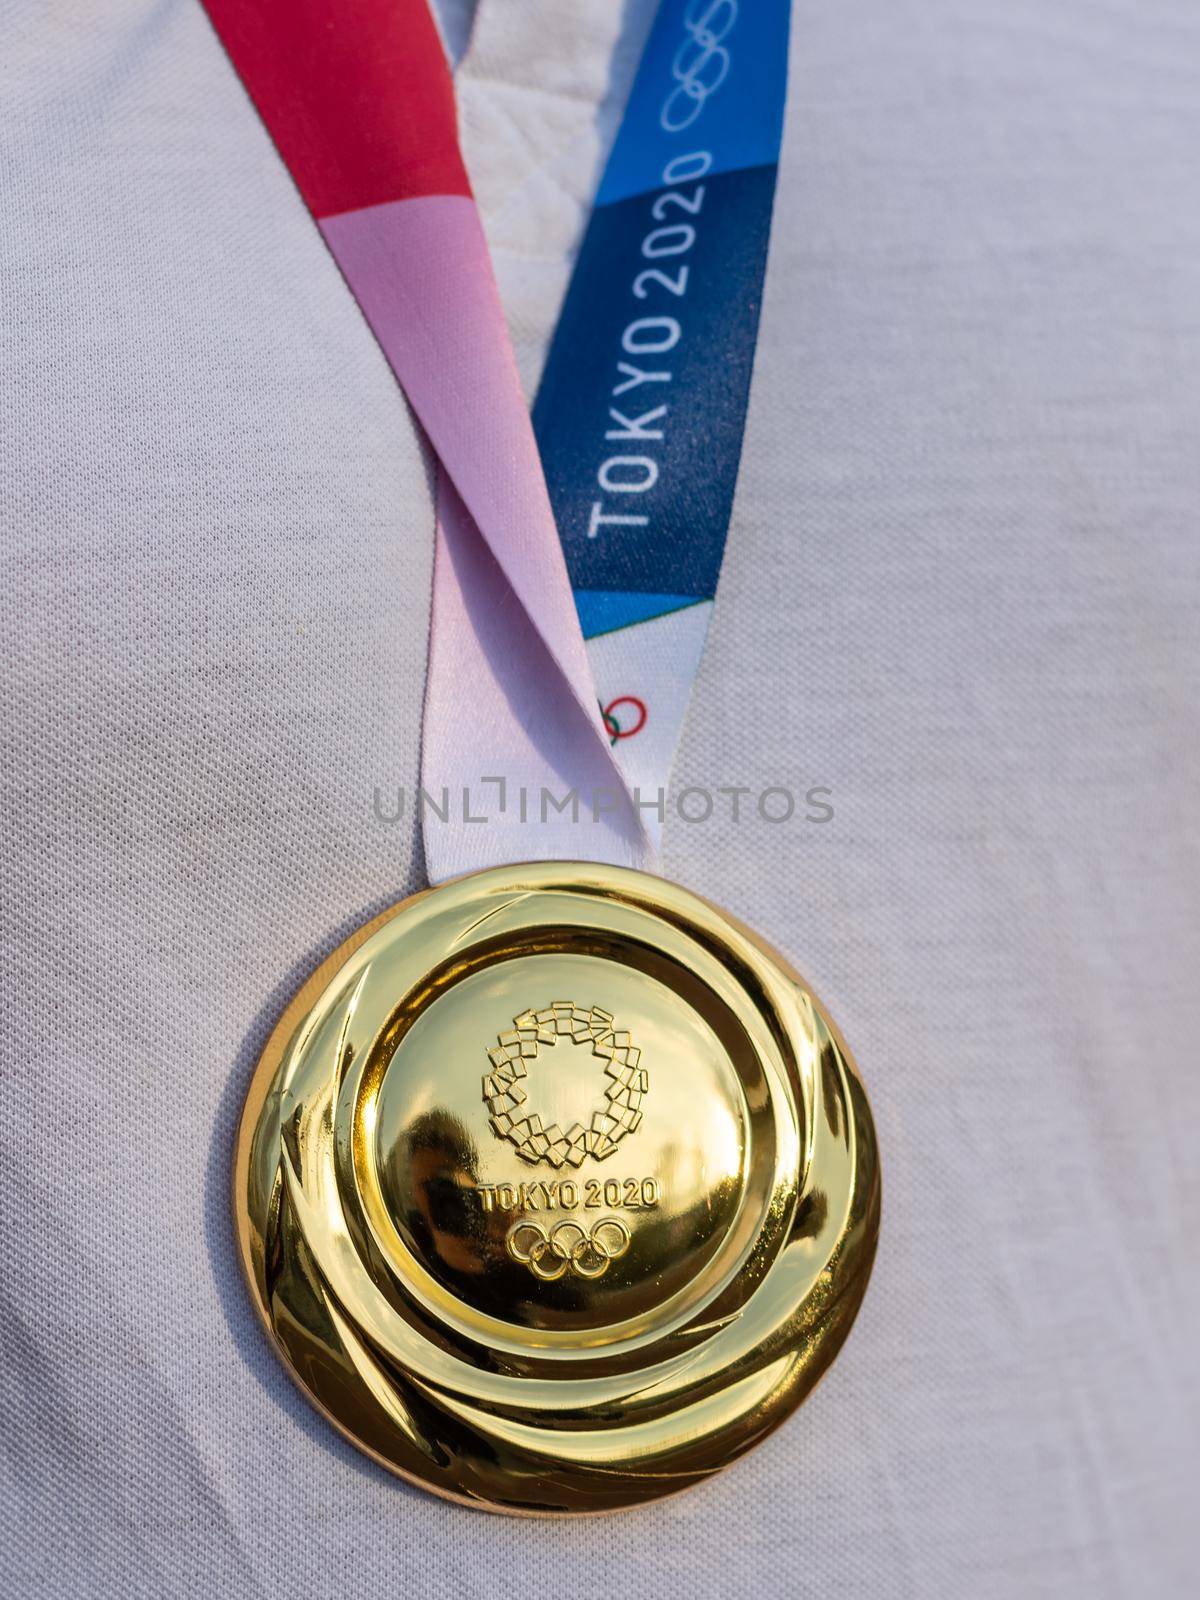 April 17, 2021 Tokyo, Japan. Gold medal of the XXXII Summer Olympic Games in Tokyo on the chest of the athlete.